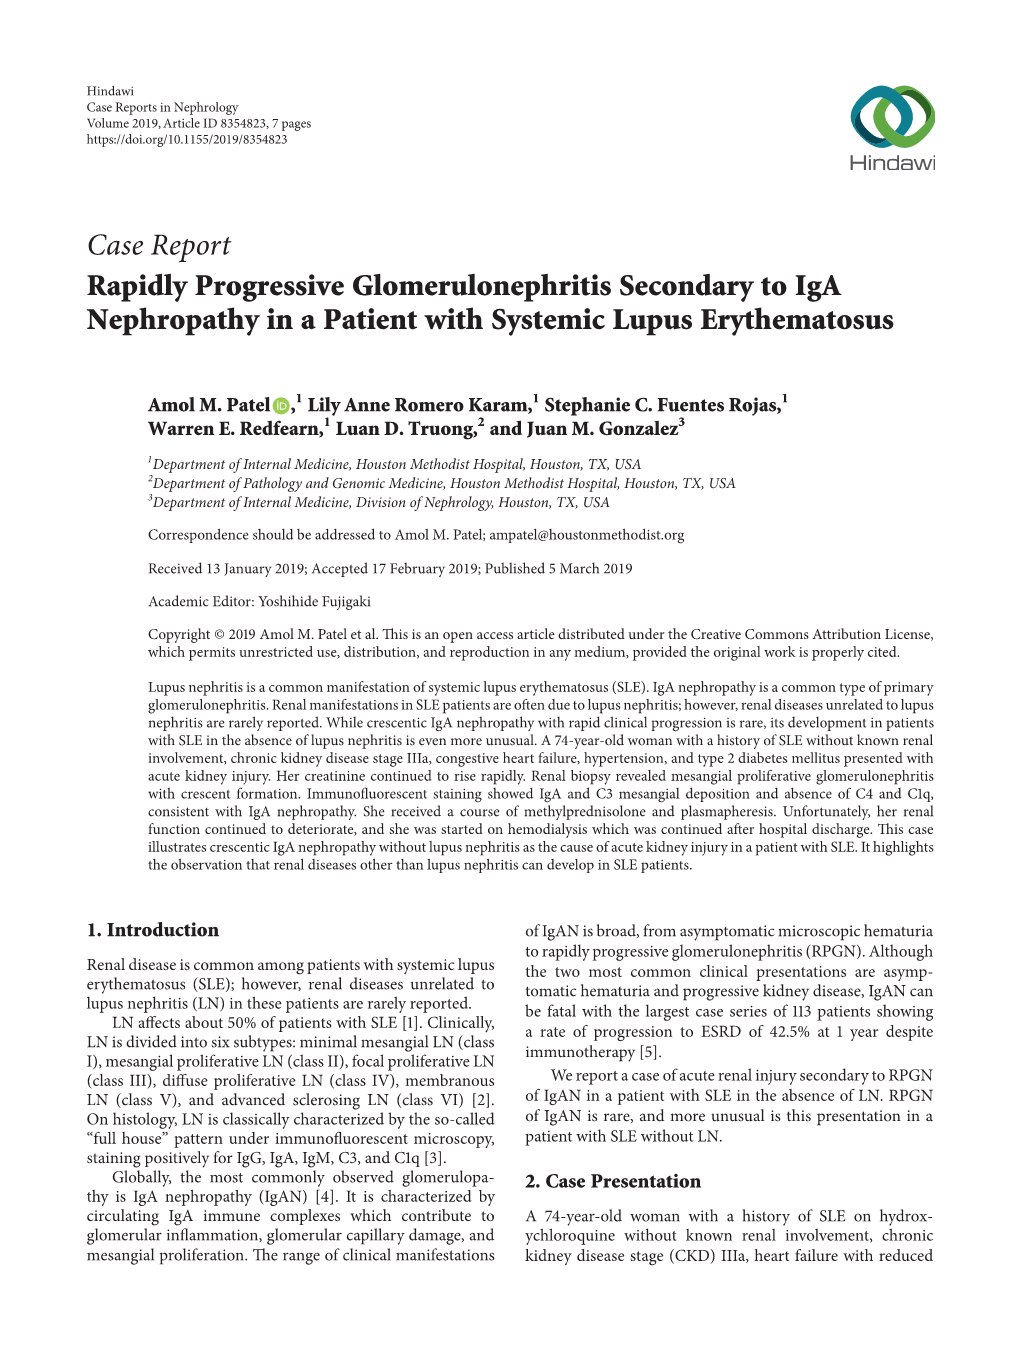 Rapidly Progressive Glomerulonephritis Secondary to Iga Nephropathy in a Patient with Systemic Lupus Erythematosus